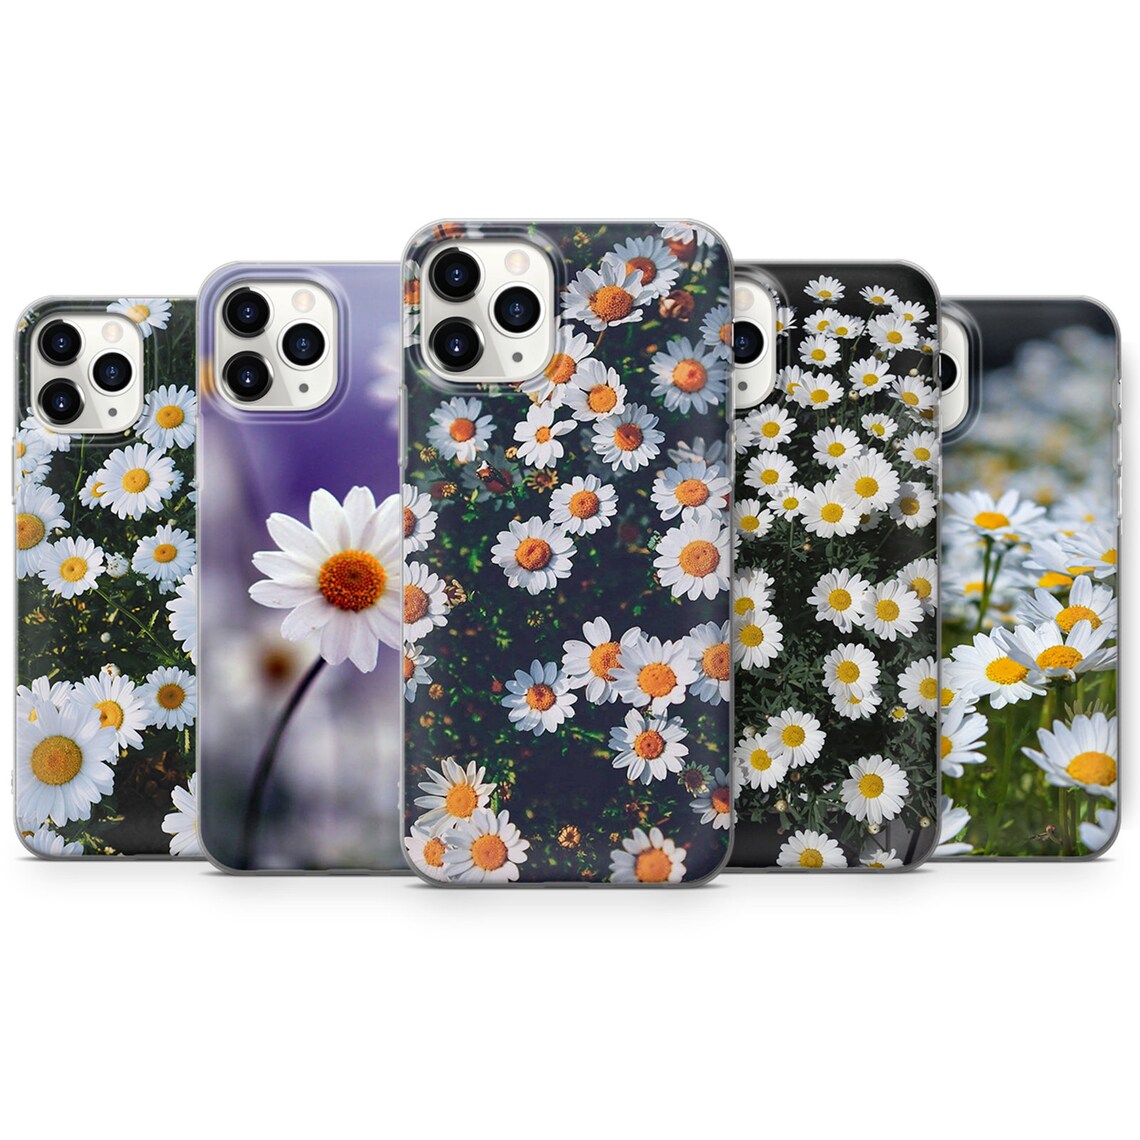 Daisy Flower Phone Case Cover For Iphone 7 8 Xs Xr 11 And Etsy